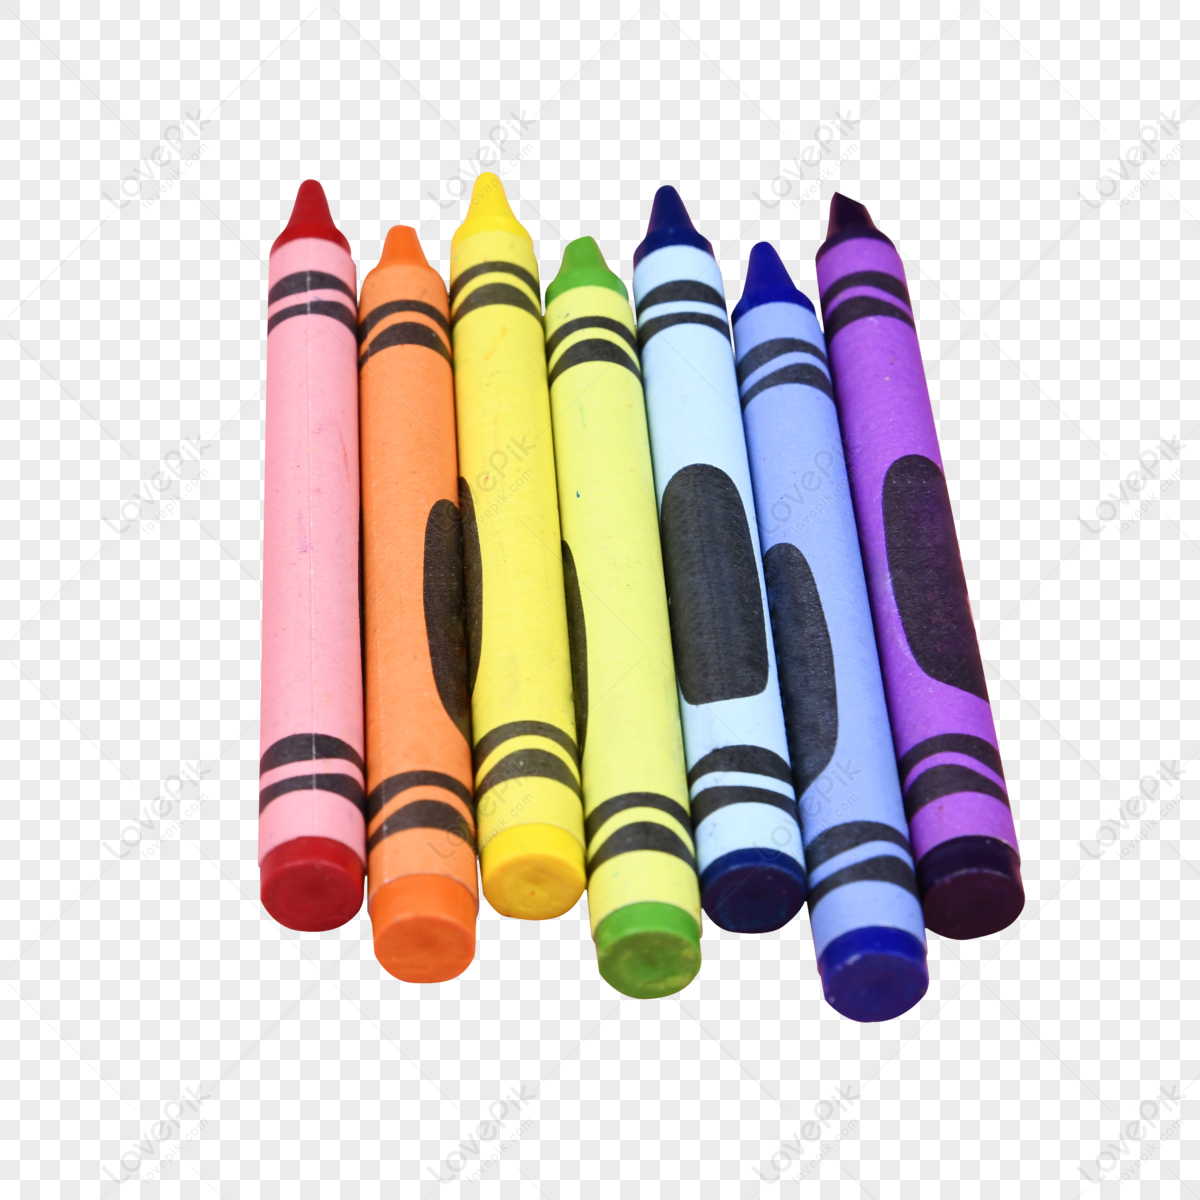 Rainbow Crayon PNG Images With Transparent Background